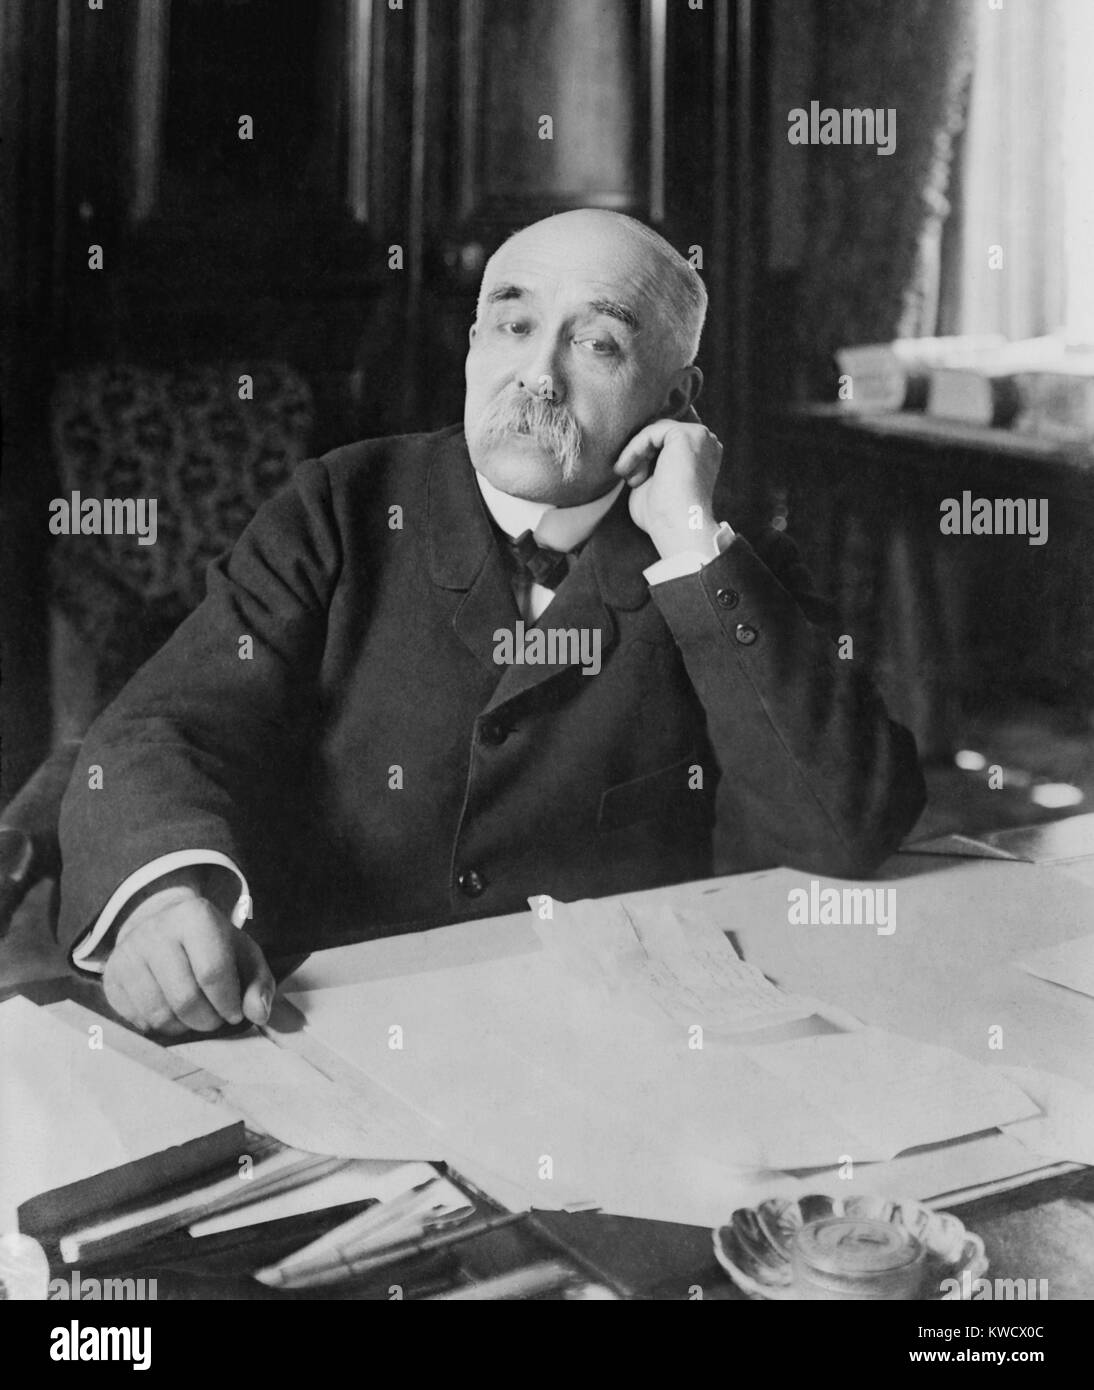 Georges Clemenceau was Prime Minister of France from Oct. 25. 1906 – July 24, 1909. In a second term, from 1917 to 1920, he influenced the Paris Peace Conference of 1919 to impose harsh conditions on Germany (BSLOC 2017 1 73) Stock Photo